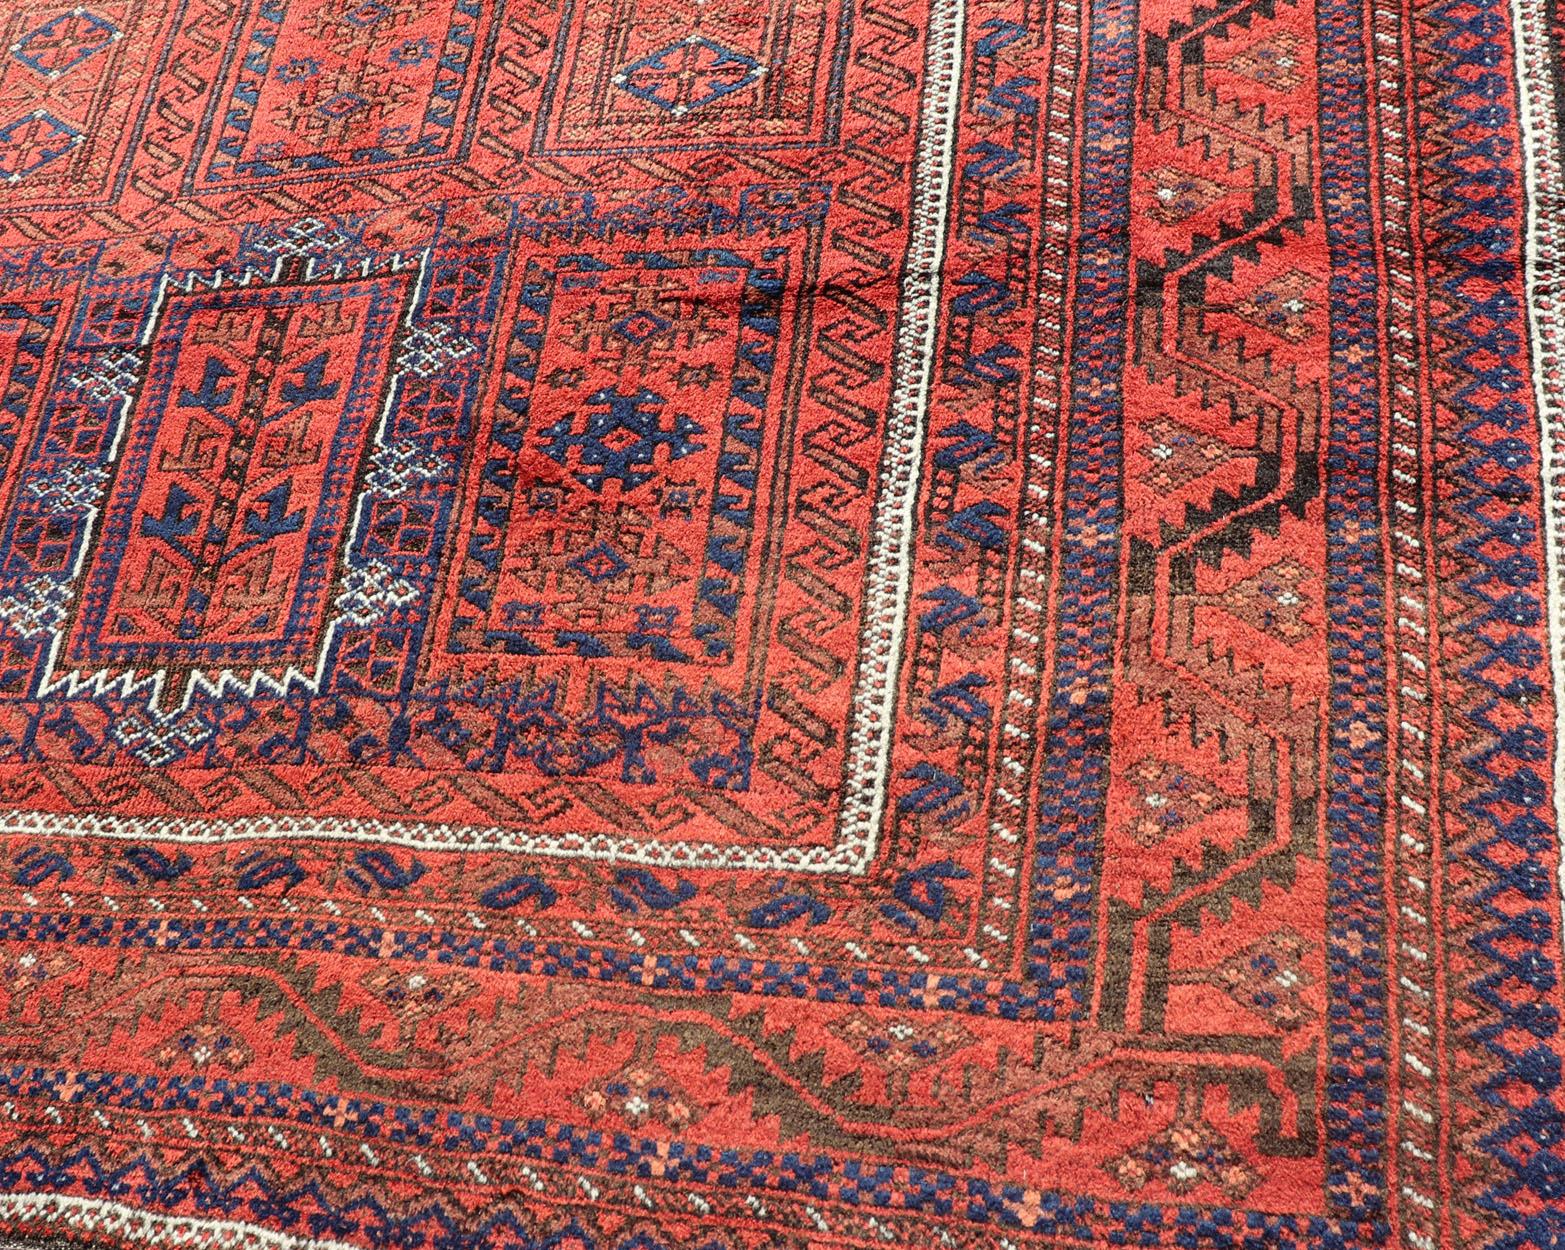 Antique Baluch Tribal Rug with All-Over Geometric Medallion Design in Red. Keivan Woven Arts, rug EMB-9672-P13589; country of origin / type: iran / Baluch, circa 1920s.

This Antique Baluch Rug has been hand-knotted and features an impressive